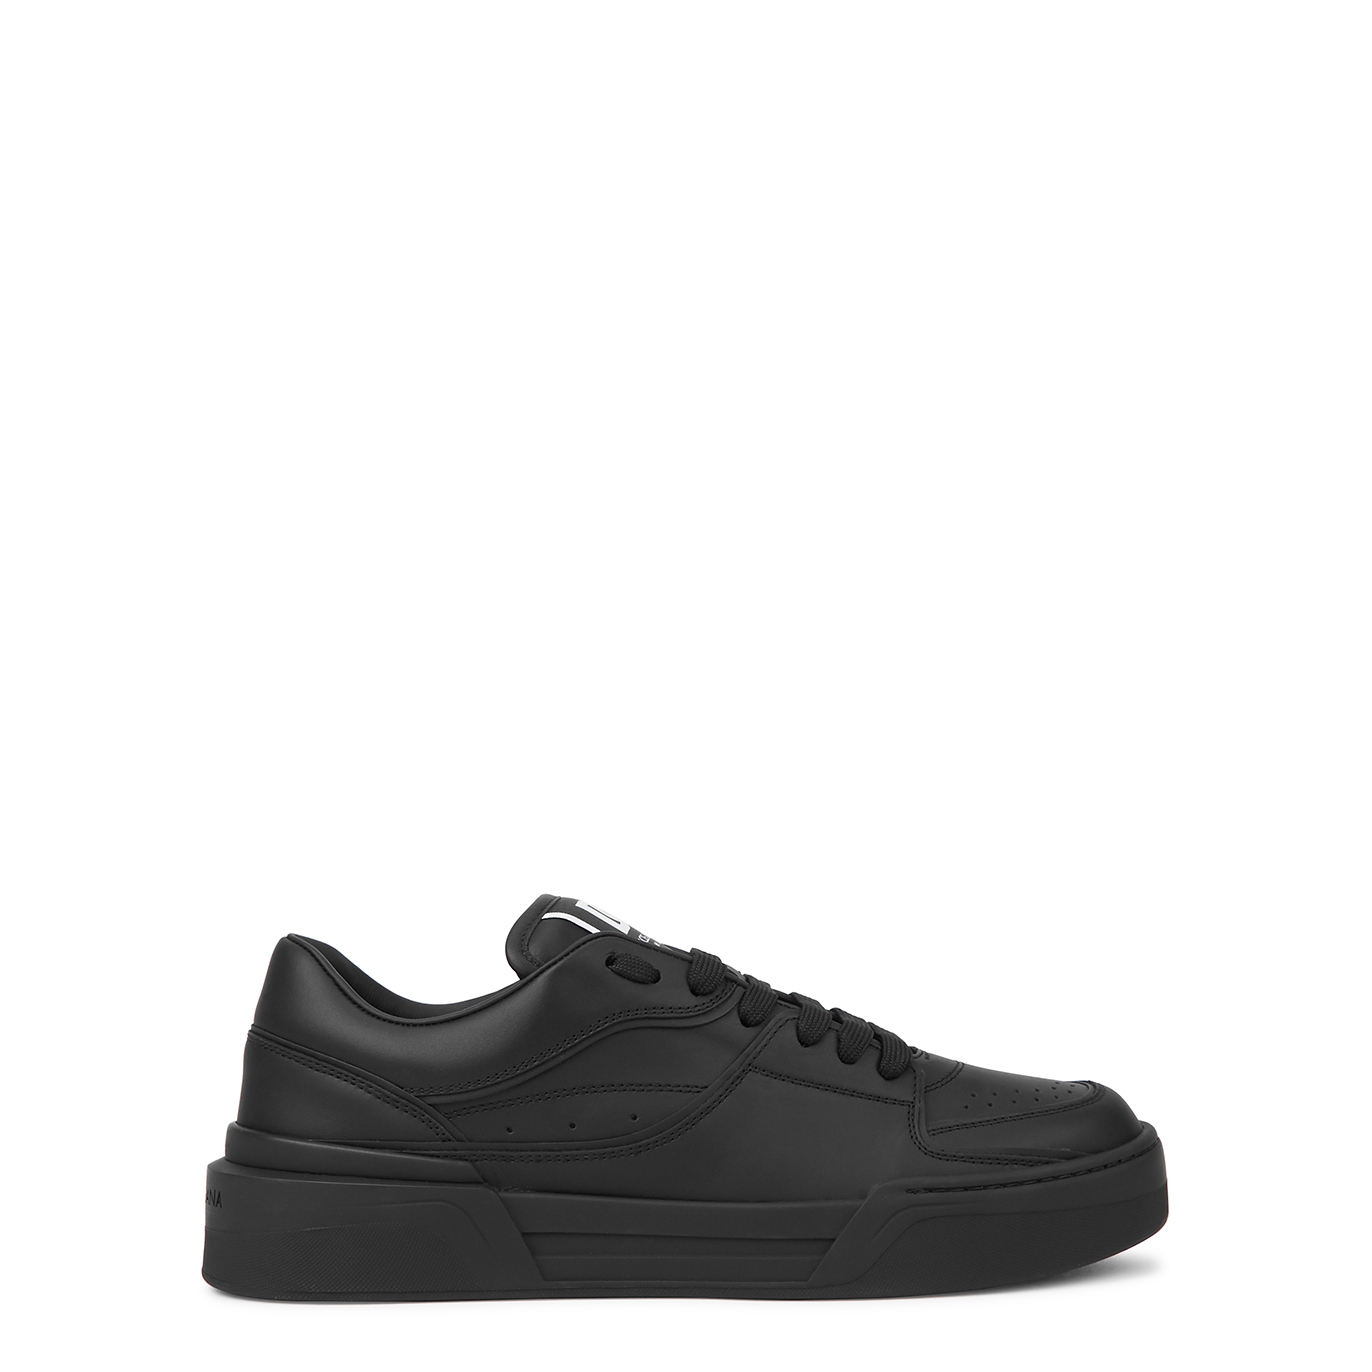 Dolce & Gabbana New Roma Black Leather Sneakers - 8